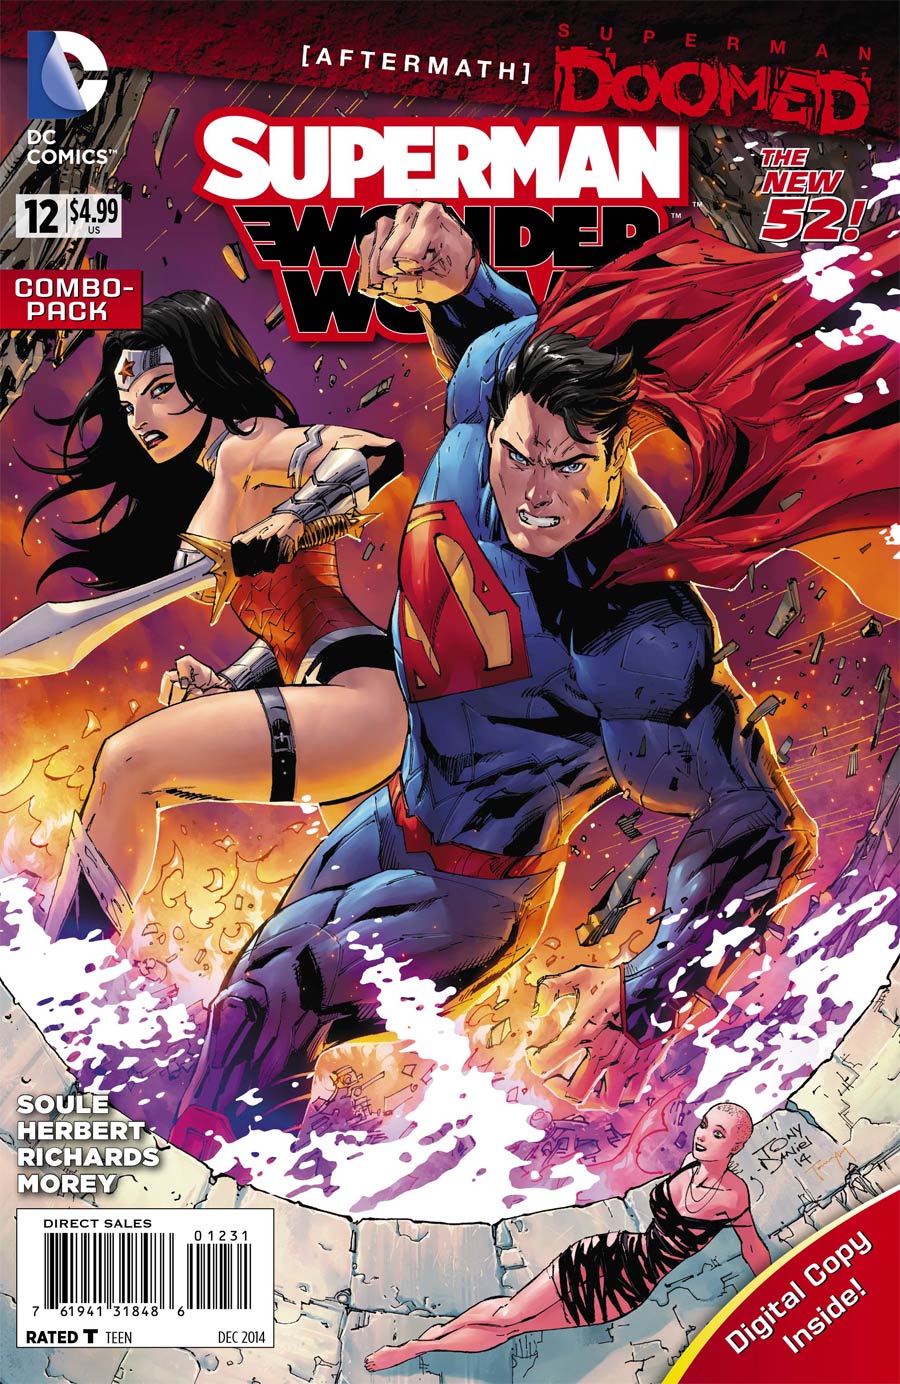 Superman Wonder Woman #12 Cover D Combo Pack Without Polybag (Superman Doomed Aftermath)